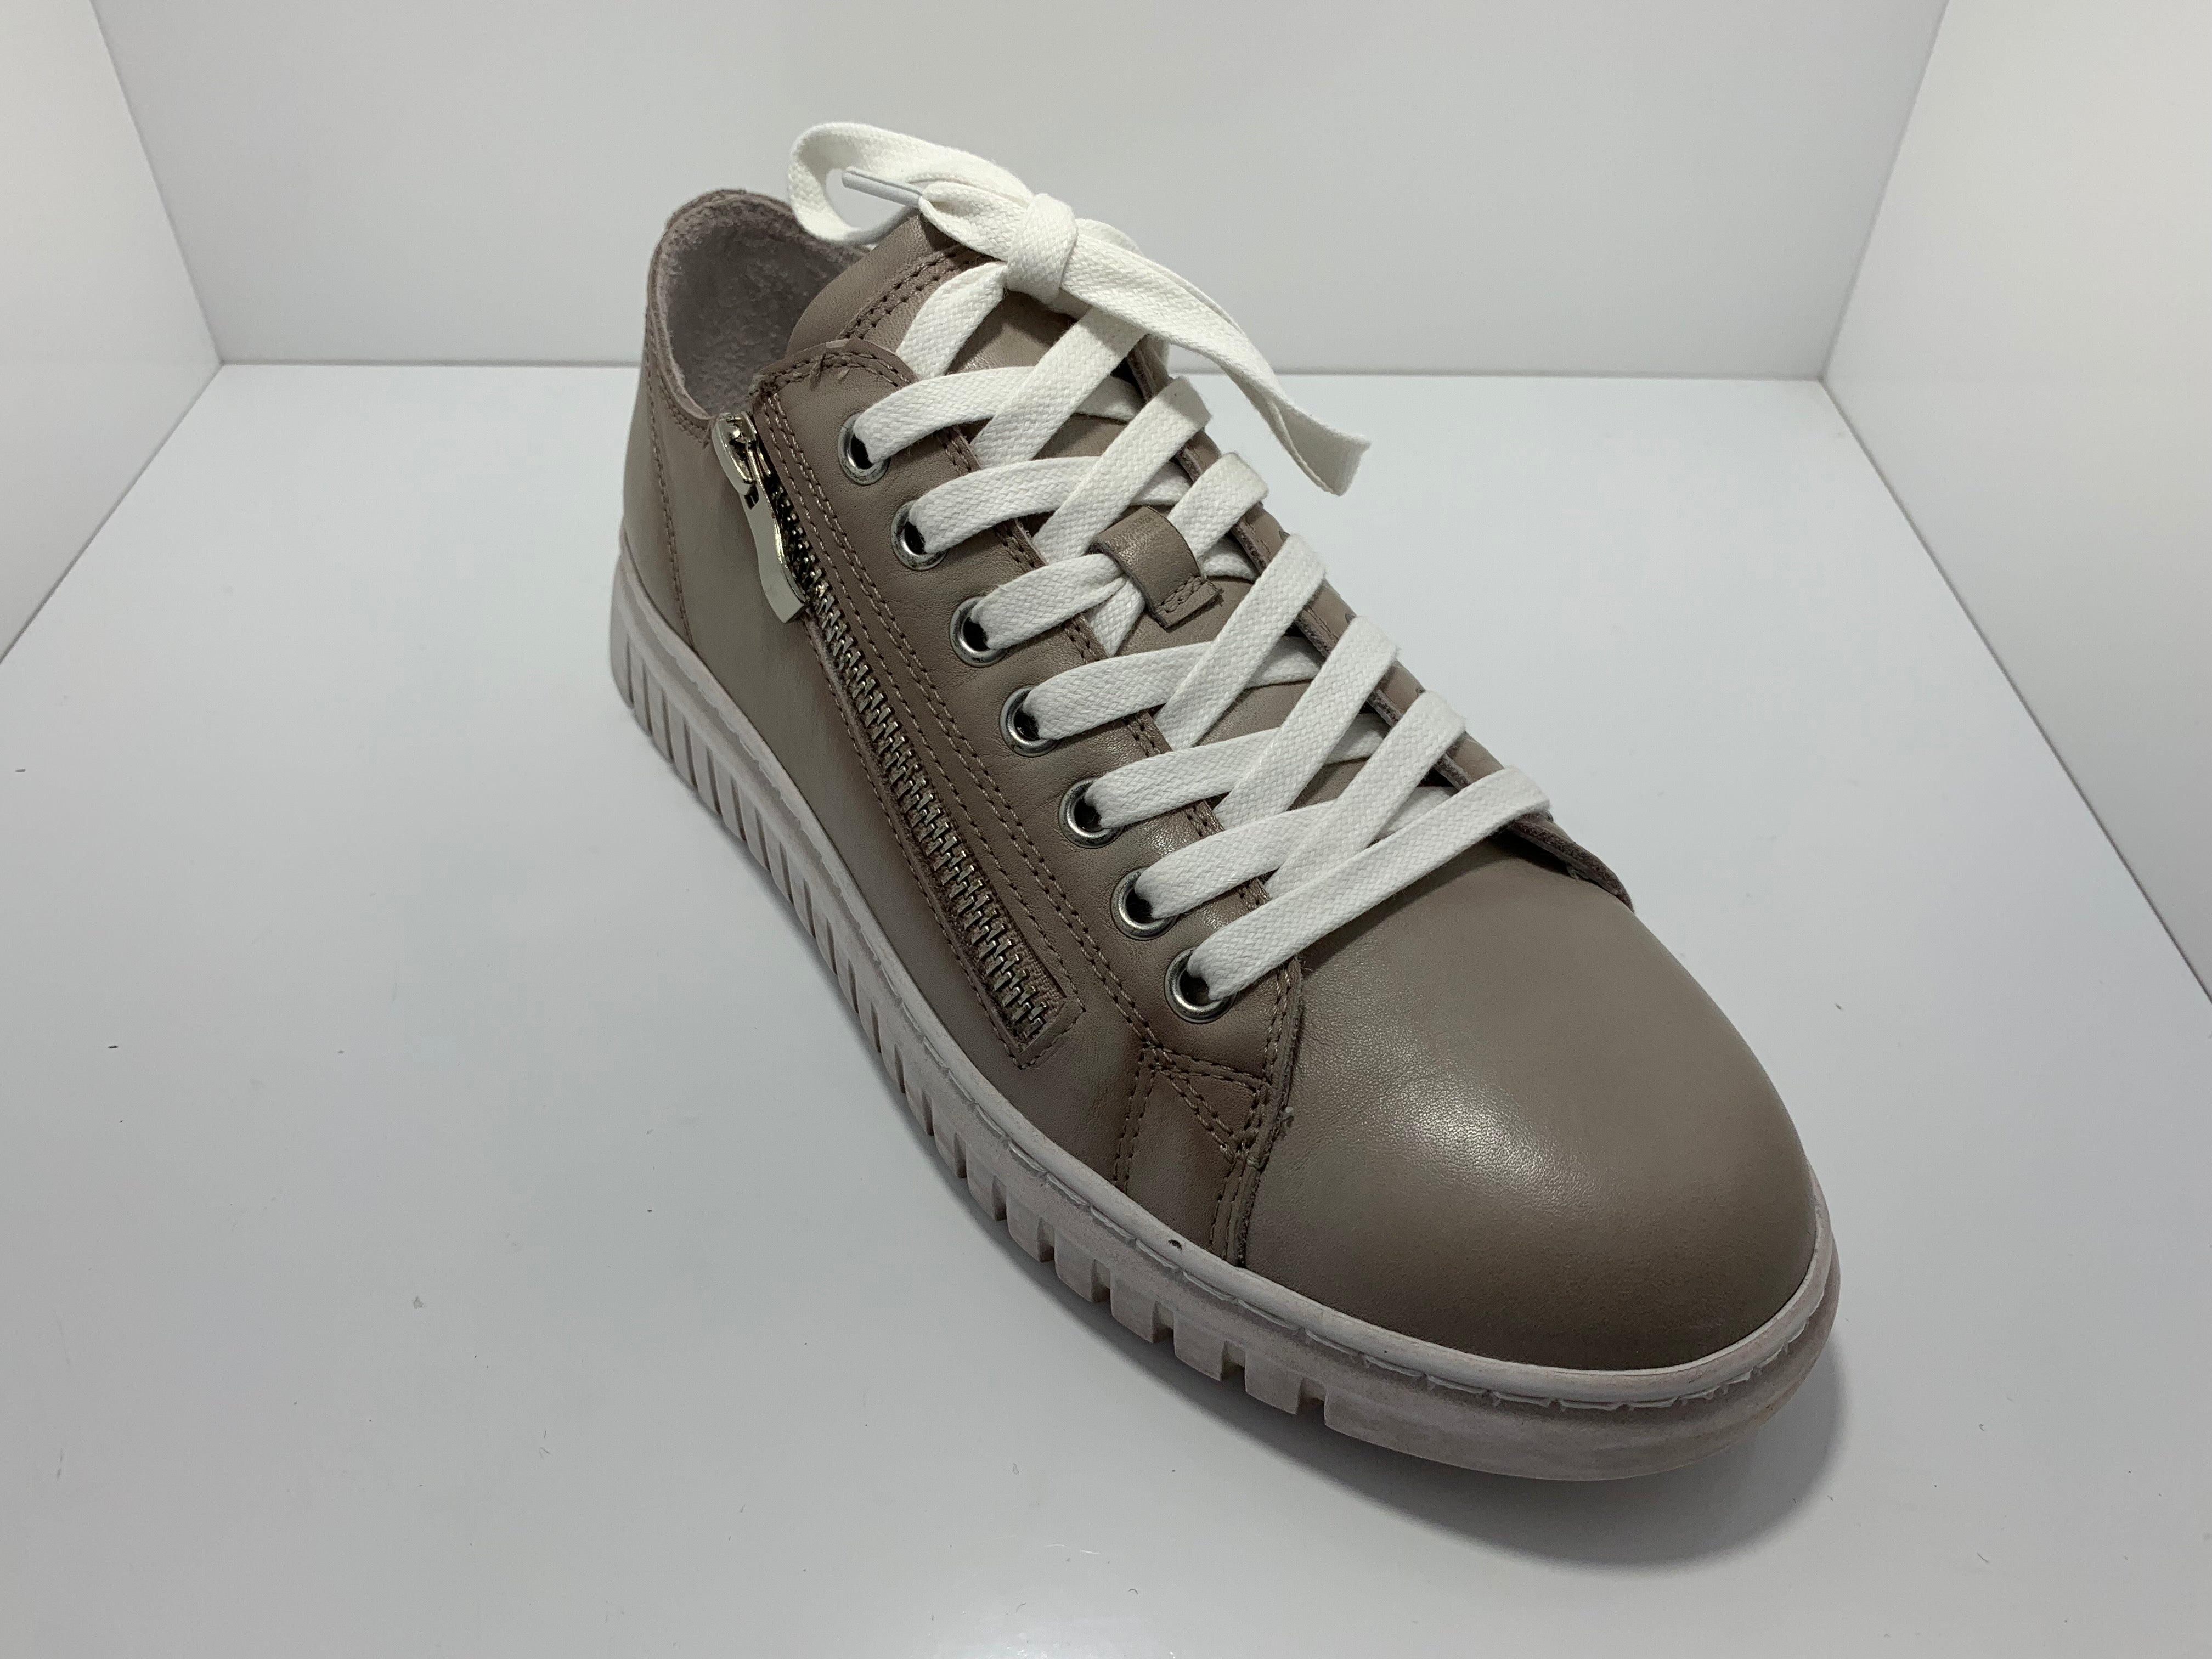 Shades Leather Sneaker by EOS